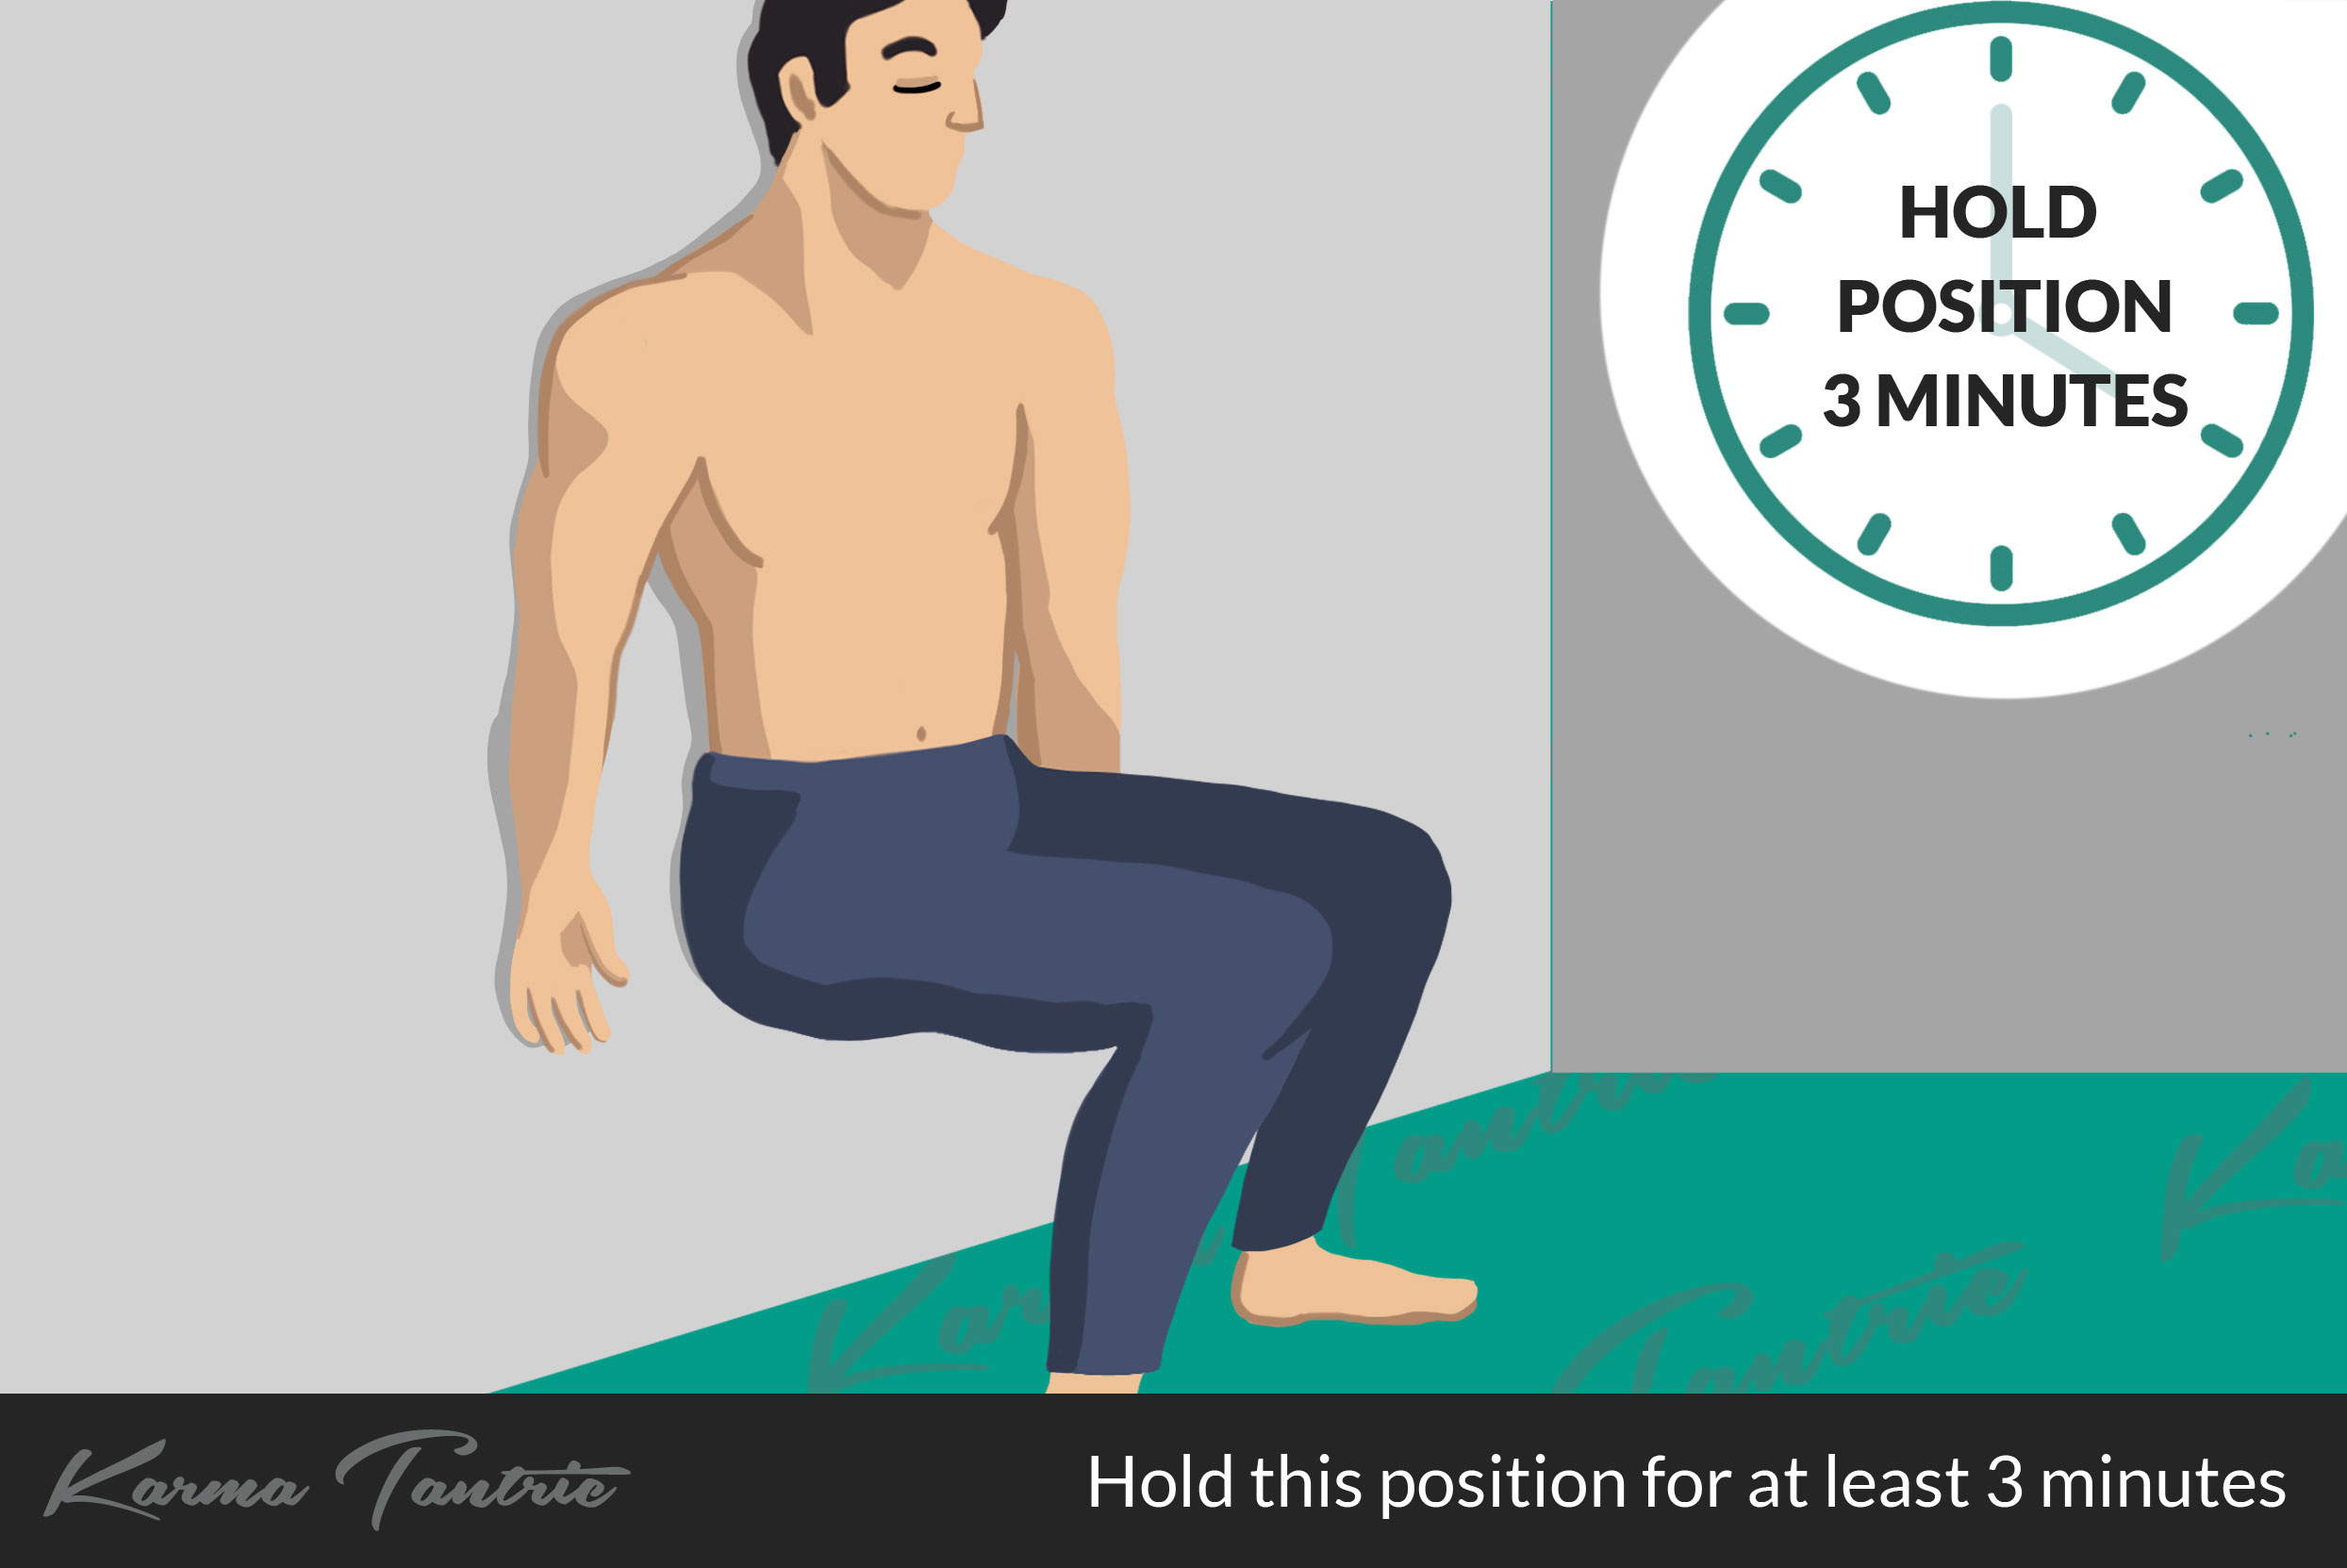 Hold position for 3 minutes